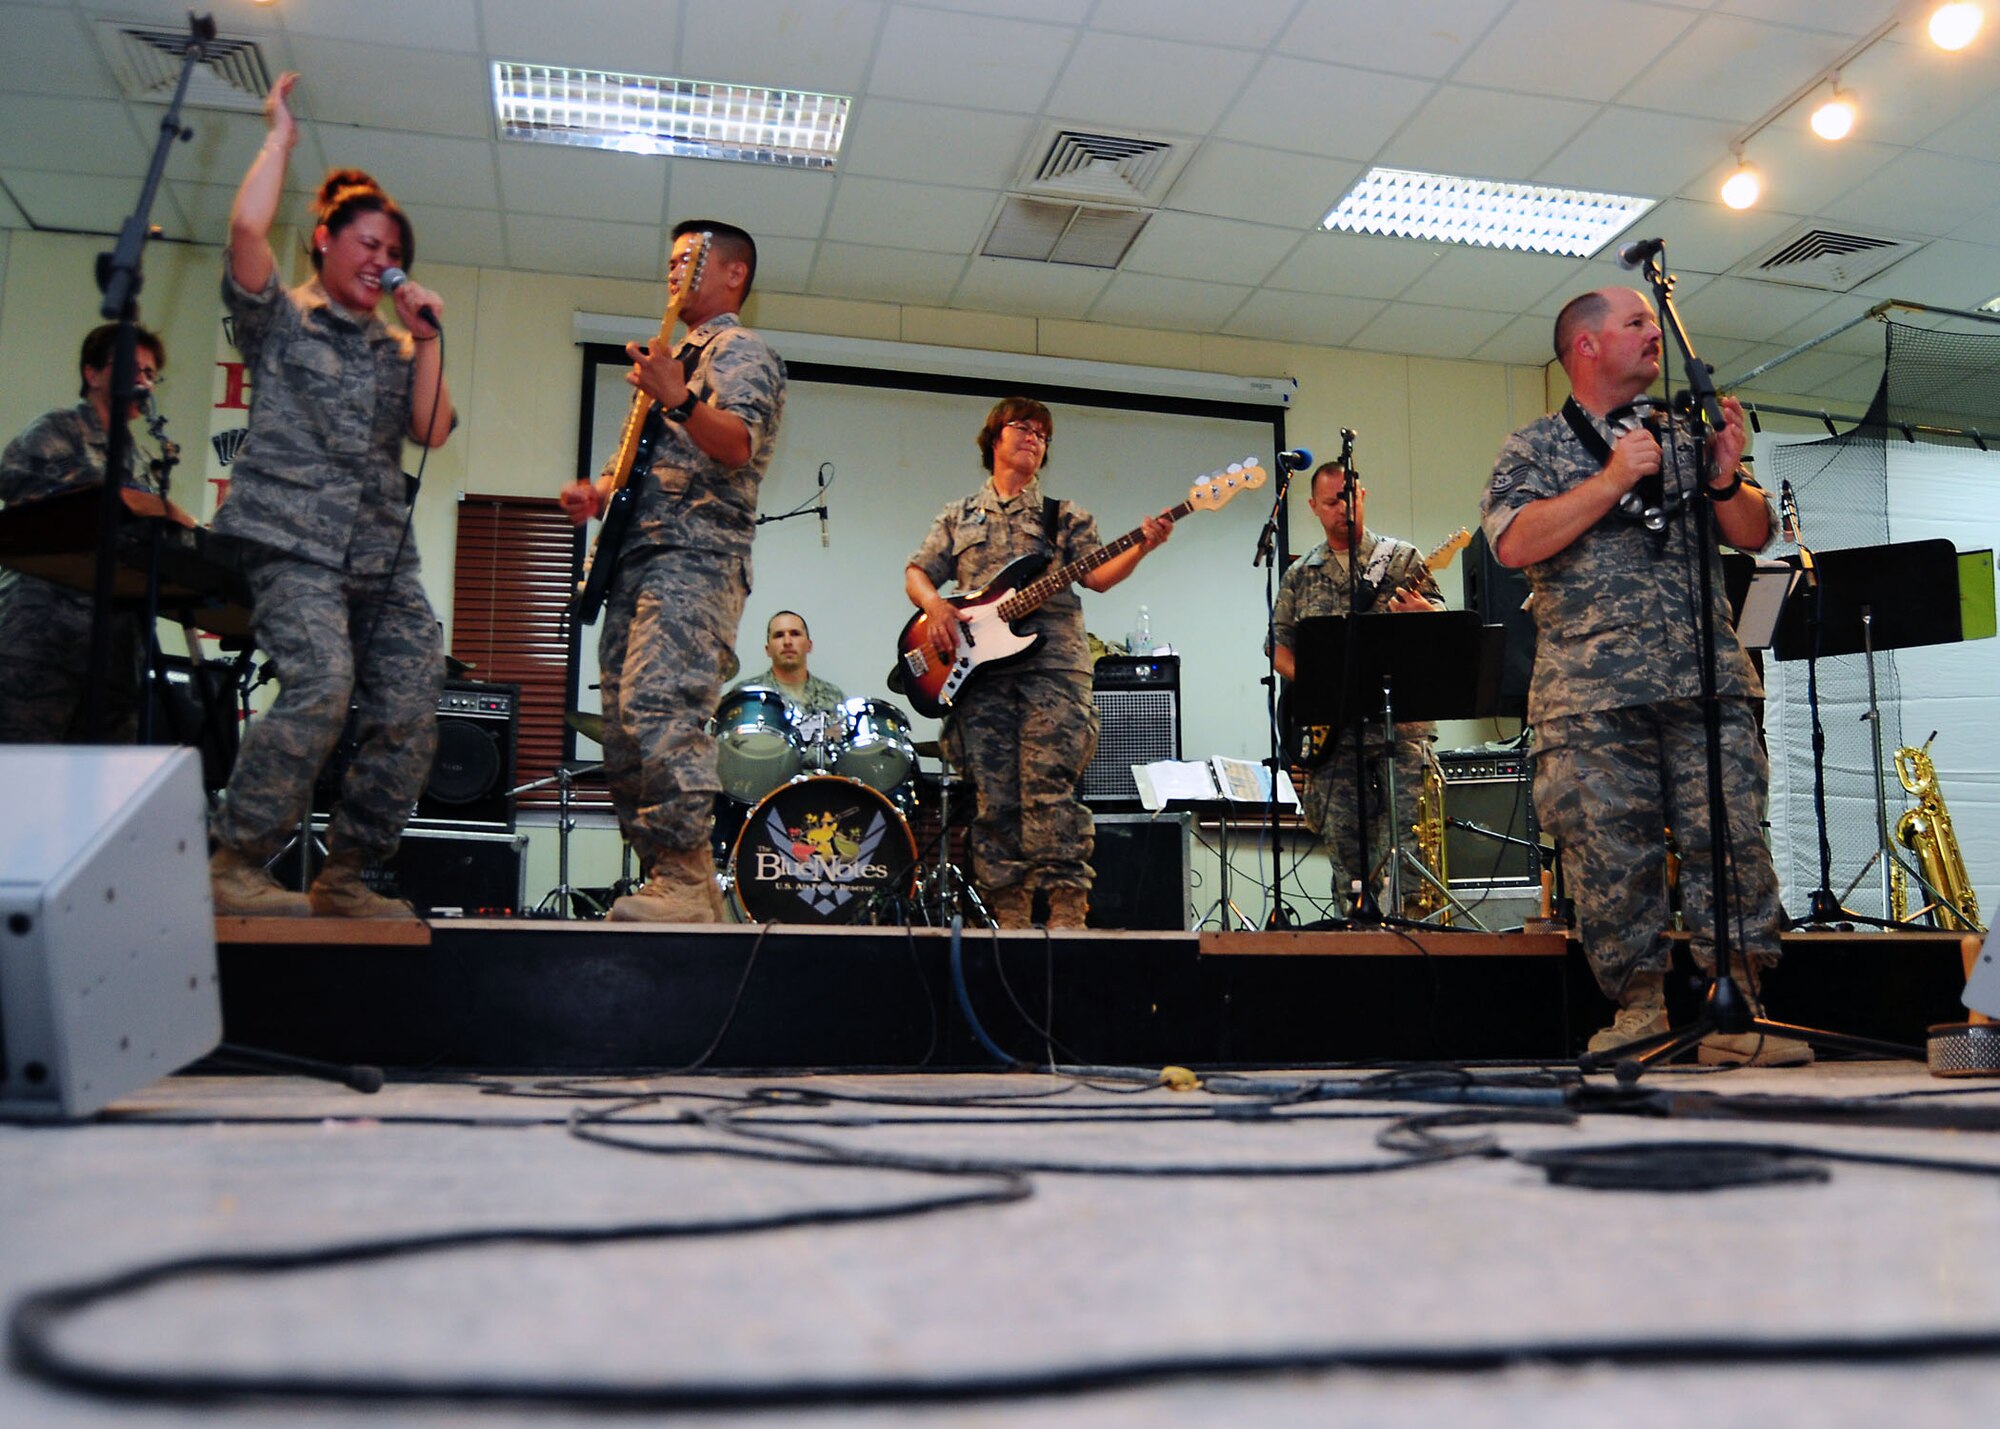 SOUTHWEST ASIA -- The Air Force Central Command band Sanora rocks out for members of the 386th Air Expeditionary Wing July 21. The concert is part of a month-long trip throughout the region. The band will travel to Camp Bucca, Iraq, before heading back to the states. (U.S. Air Force photo/Tony Tolley)